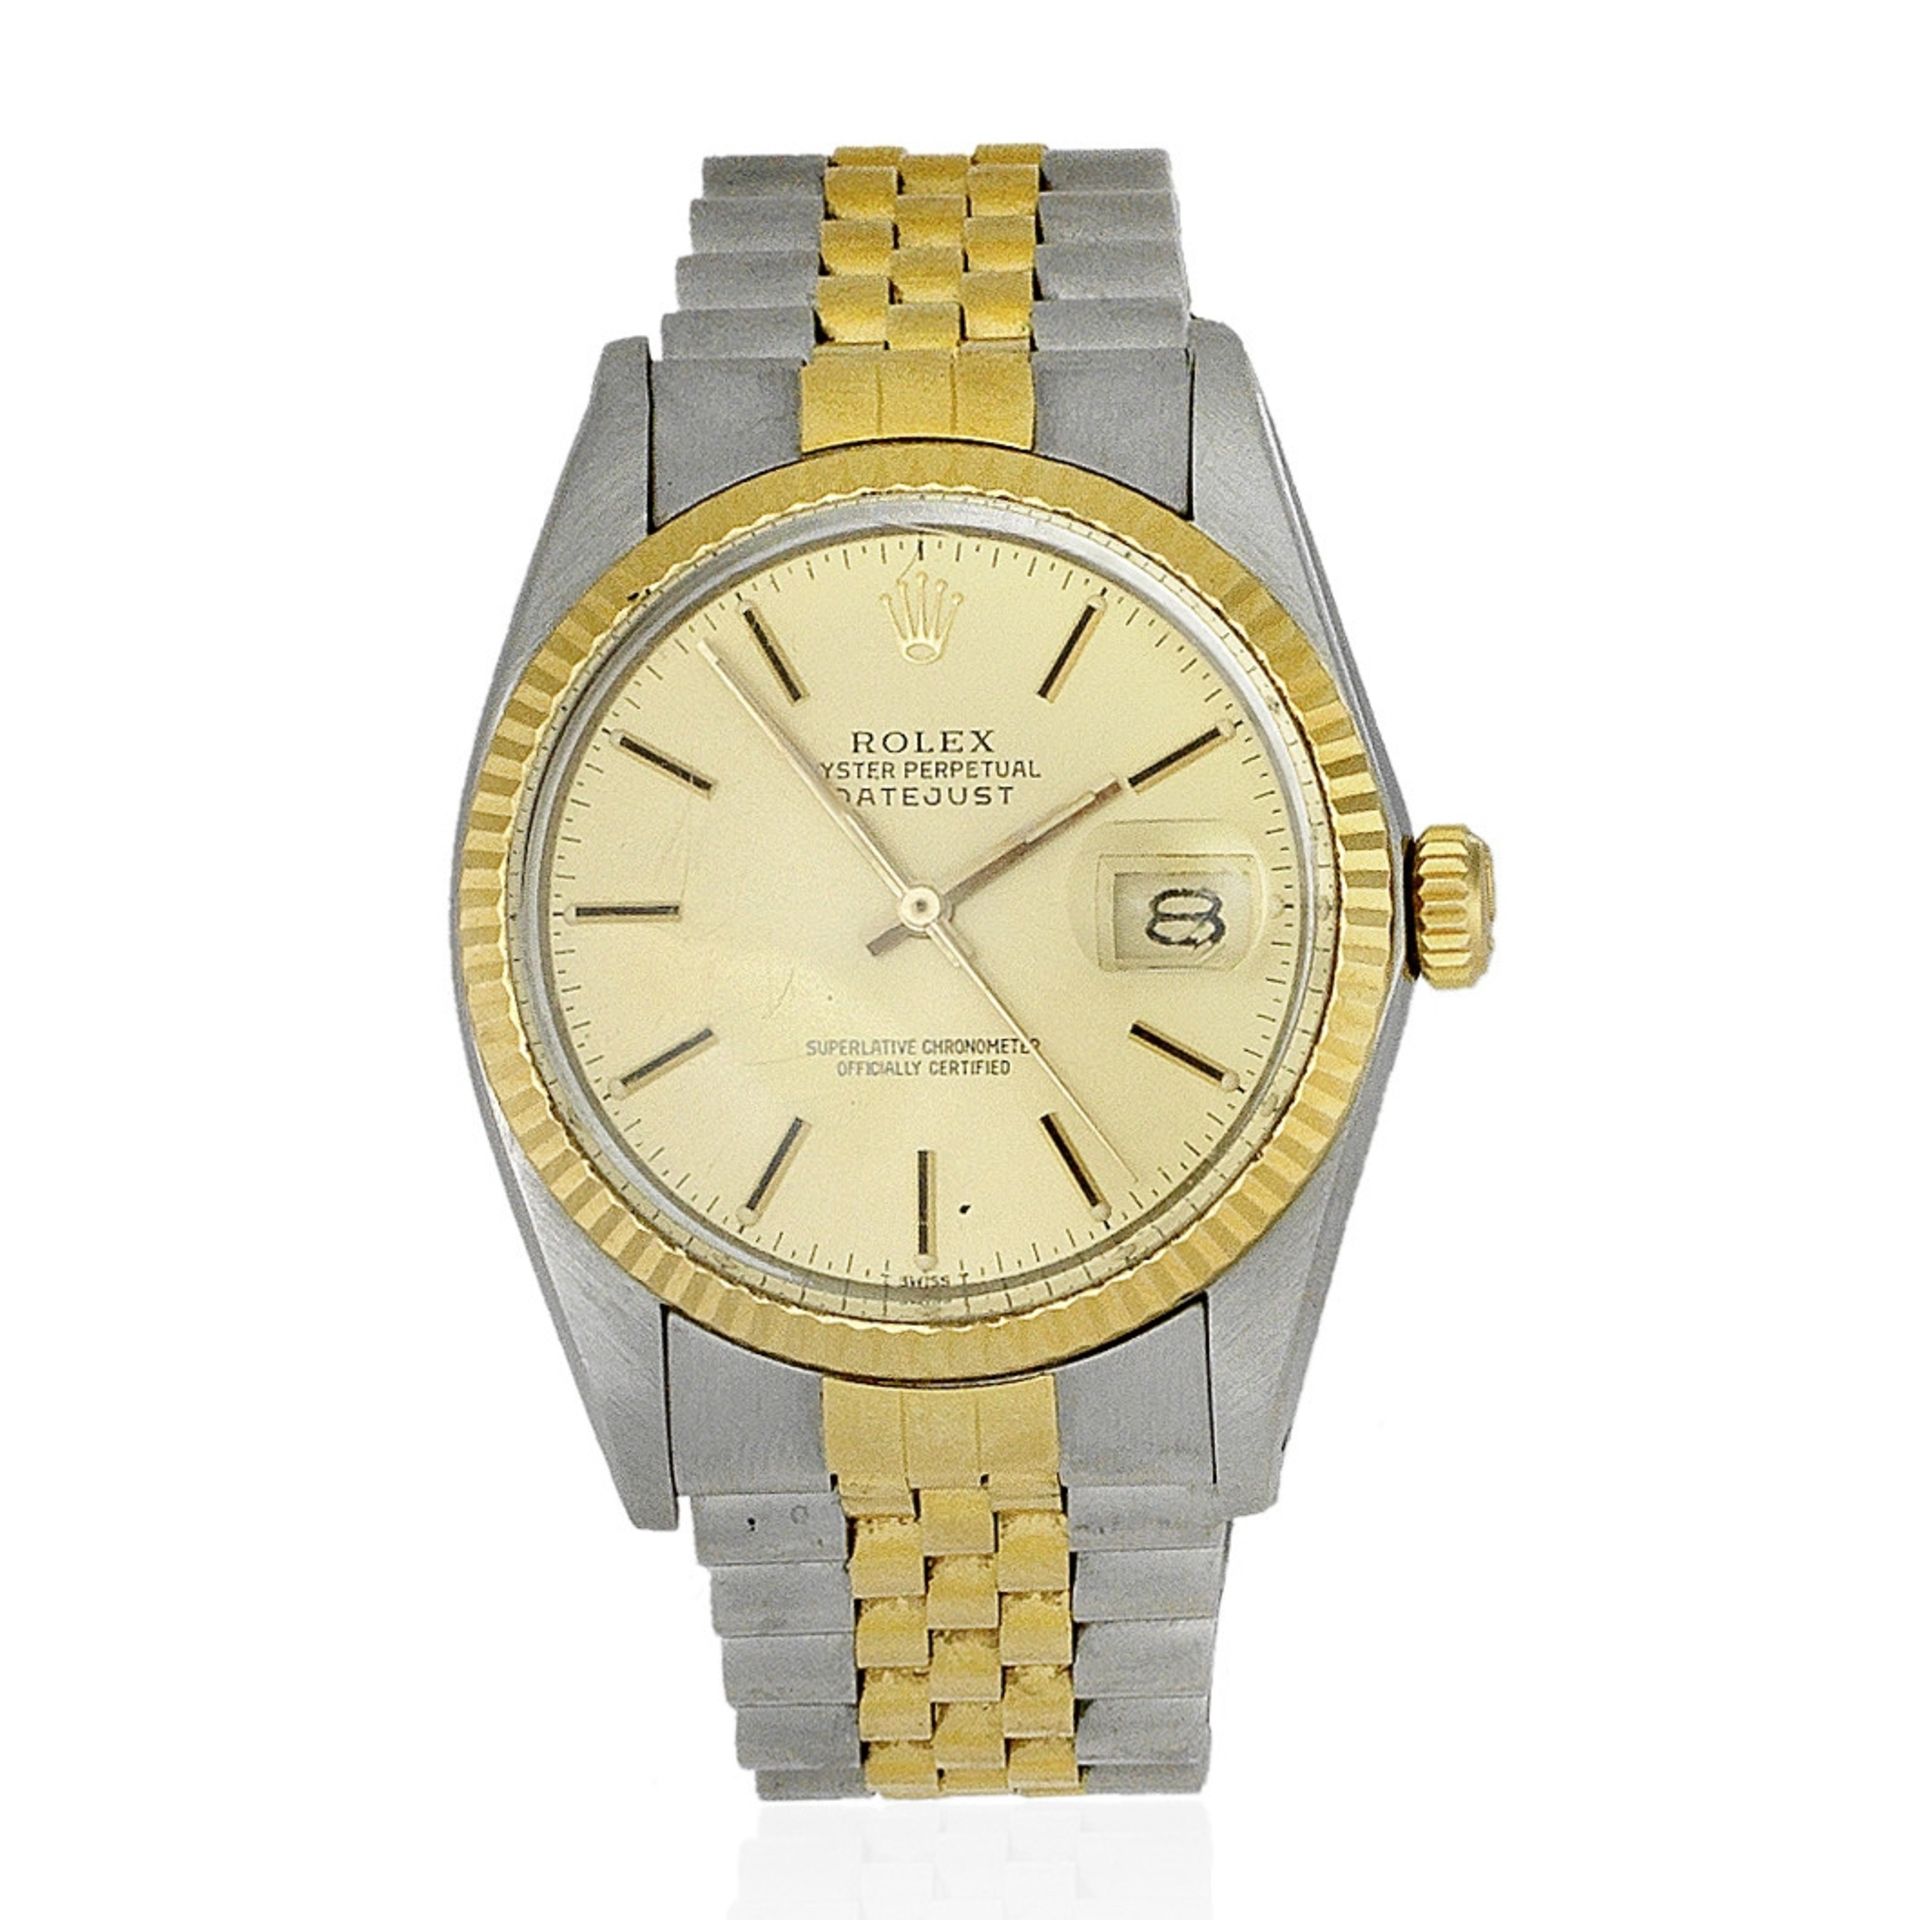 Rolex. A stainless steel and gold automatic calendar bracelet watch Datejust, Ref: 16013, Purcha...